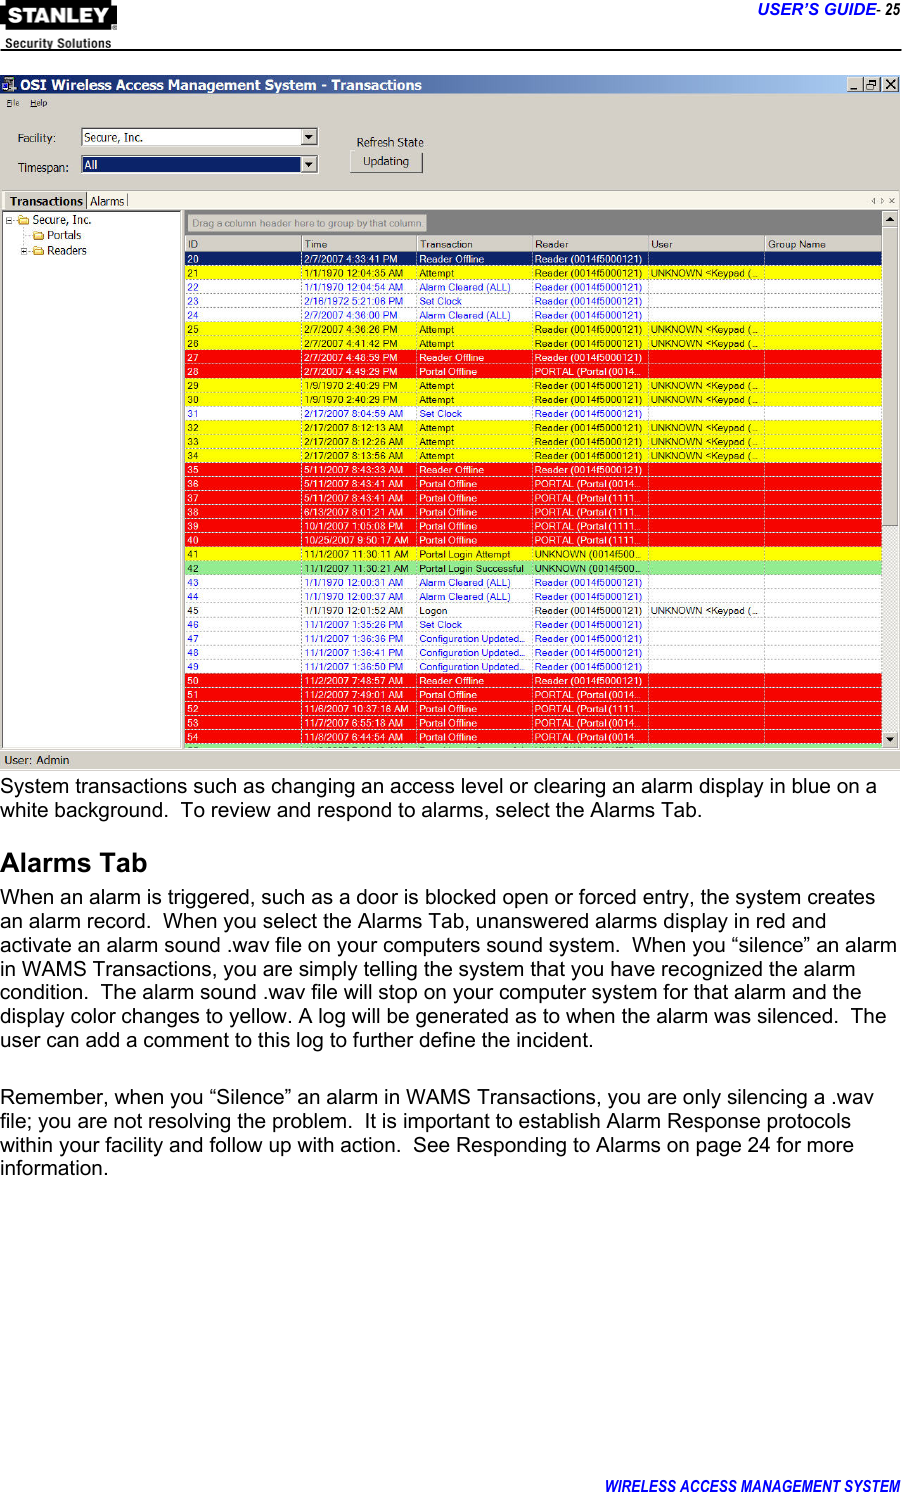      USER’S GUIDE- 25 WIRELESS ACCESS MANAGEMENT SYSTEM   System transactions such as changing an access level or clearing an alarm display in blue on a white background.  To review and respond to alarms, select the Alarms Tab. Alarms Tab When an alarm is triggered, such as a door is blocked open or forced entry, the system creates an alarm record.  When you select the Alarms Tab, unanswered alarms display in red and activate an alarm sound .wav file on your computers sound system.  When you “silence” an alarm in WAMS Transactions, you are simply telling the system that you have recognized the alarm condition.  The alarm sound .wav file will stop on your computer system for that alarm and the display color changes to yellow. A log will be generated as to when the alarm was silenced.  The user can add a comment to this log to further define the incident.  Remember, when you “Silence” an alarm in WAMS Transactions, you are only silencing a .wav file; you are not resolving the problem.  It is important to establish Alarm Response protocols within your facility and follow up with action.  See Responding to Alarms on page 24 for more information.  